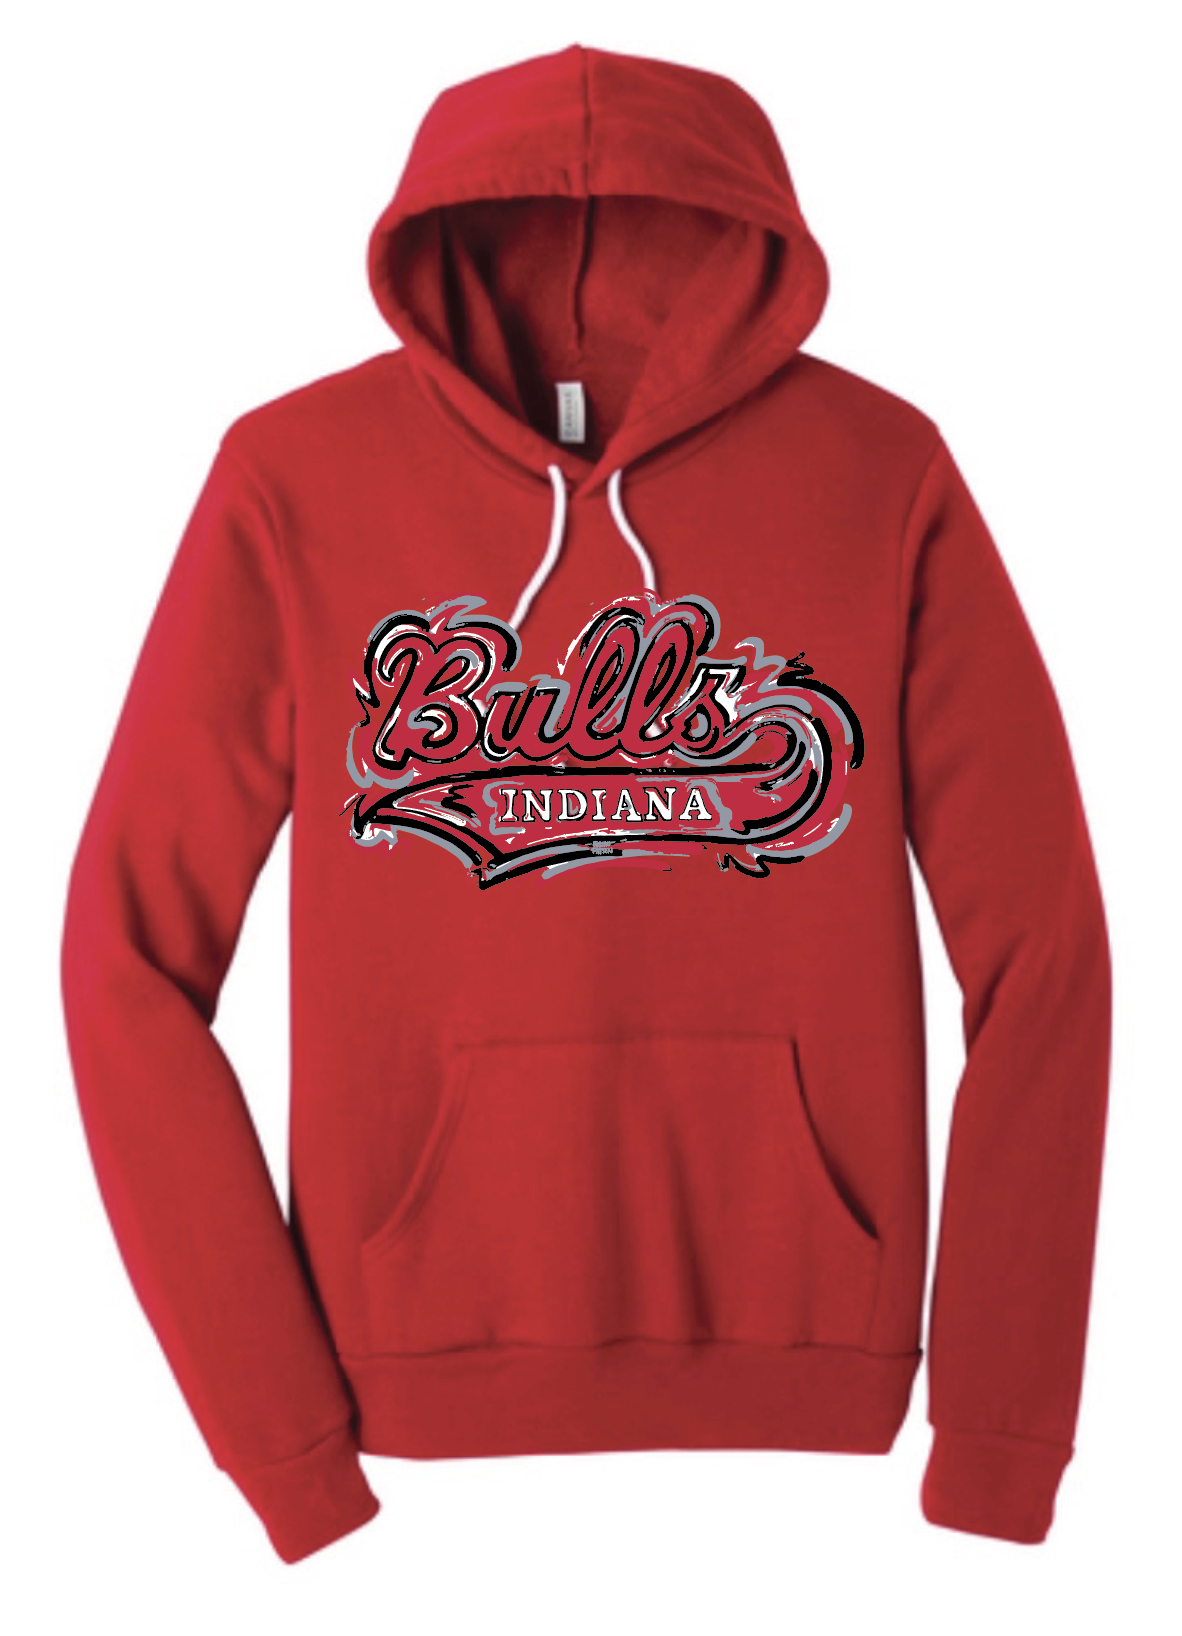 Indiana Bulls Unisex Hoodie by Justin Patten (Bella Canvas Style)(3 Colors)